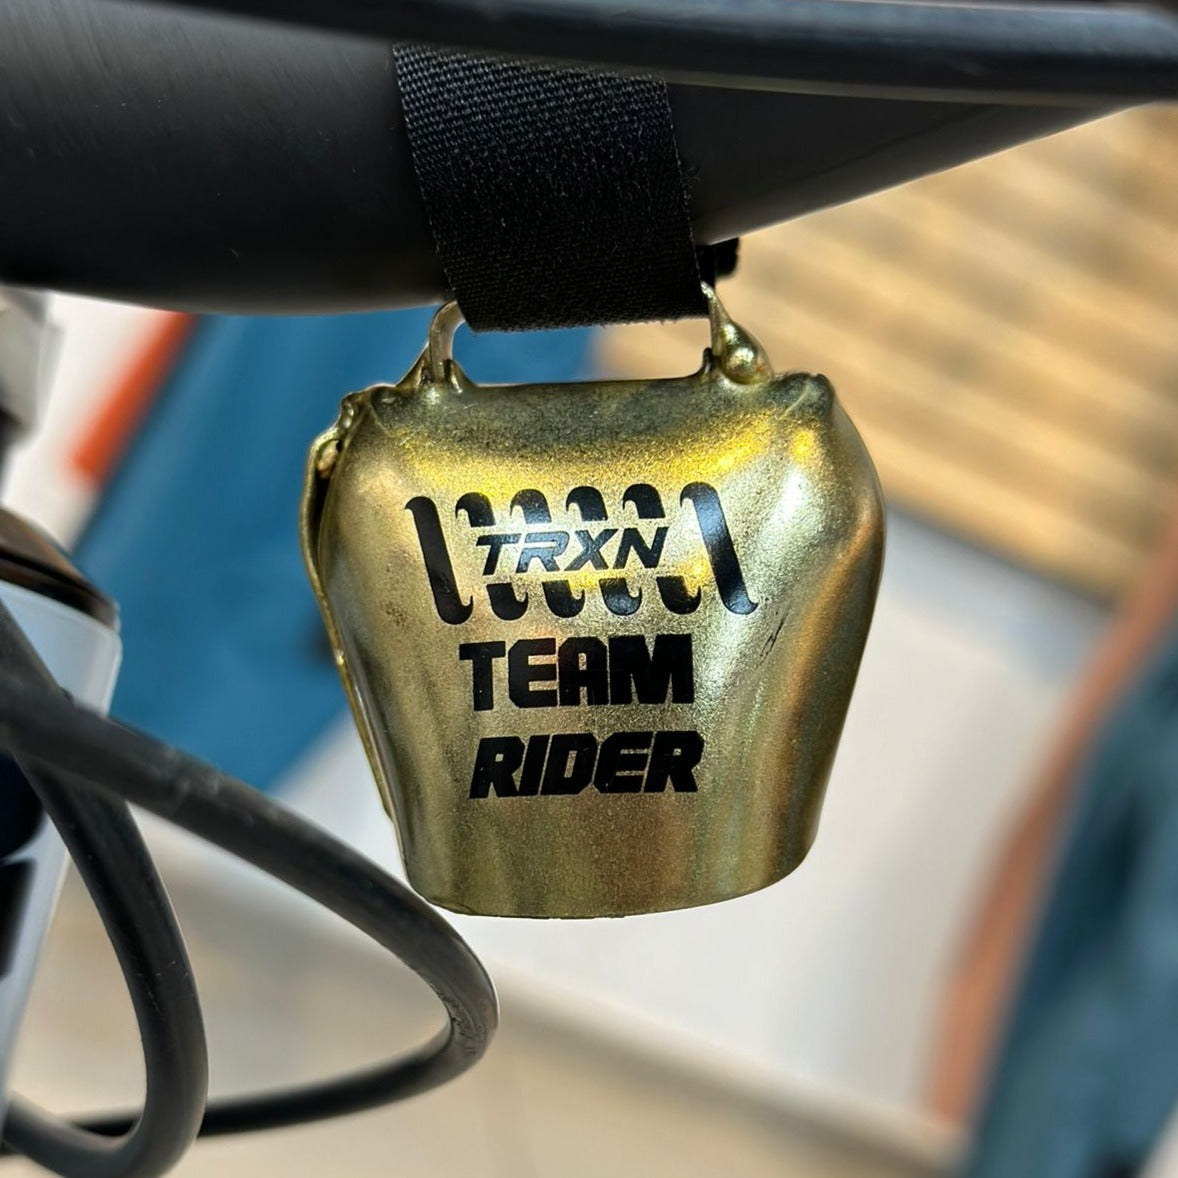 Traxion Trail Bell - GOLDEN Edition